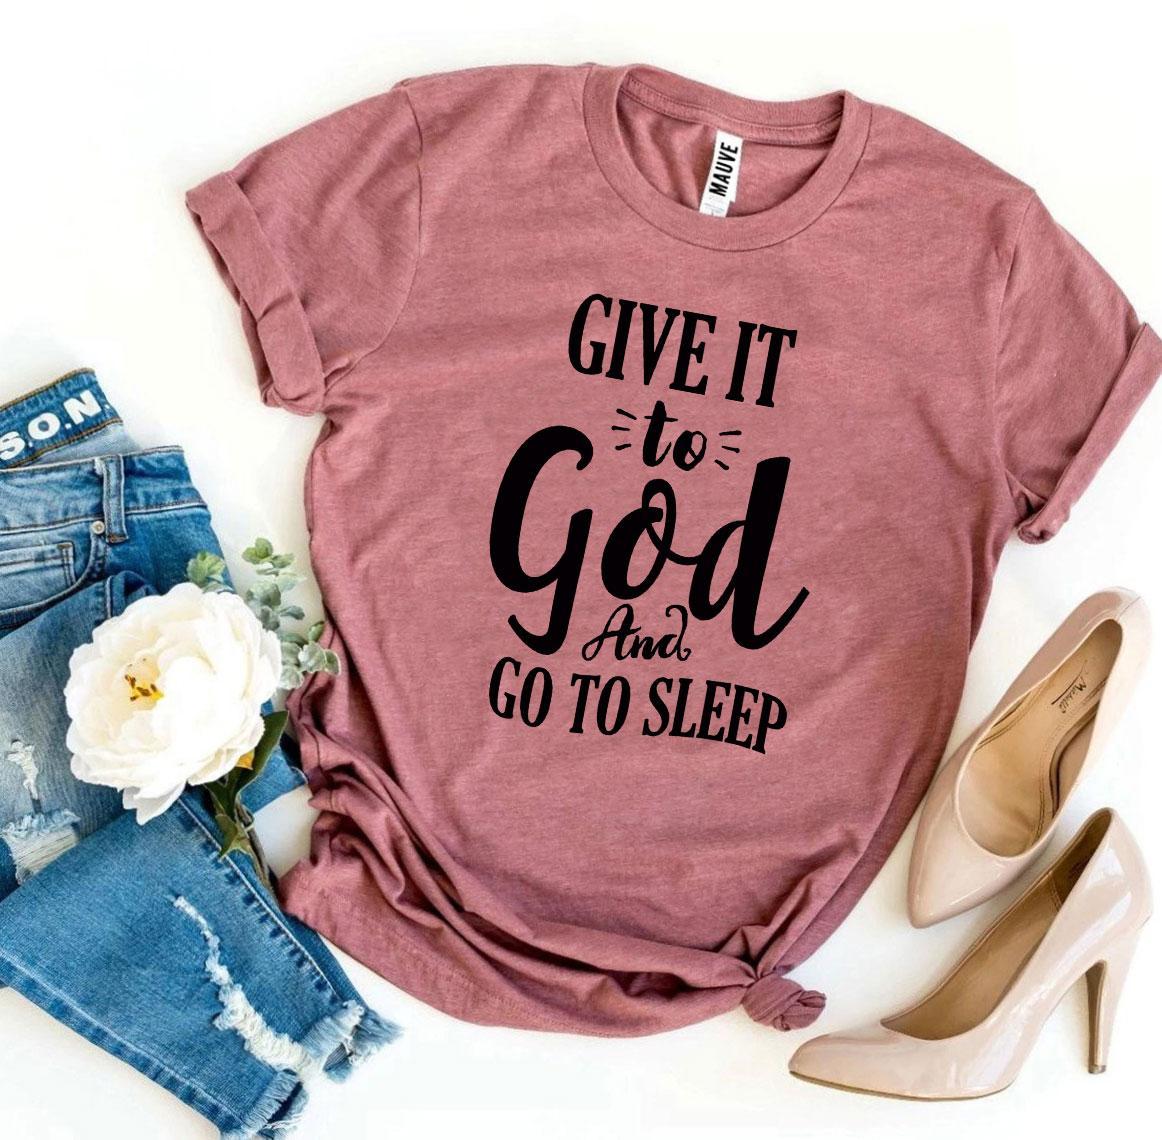 Give It To God And Go To Sleep T-shirt